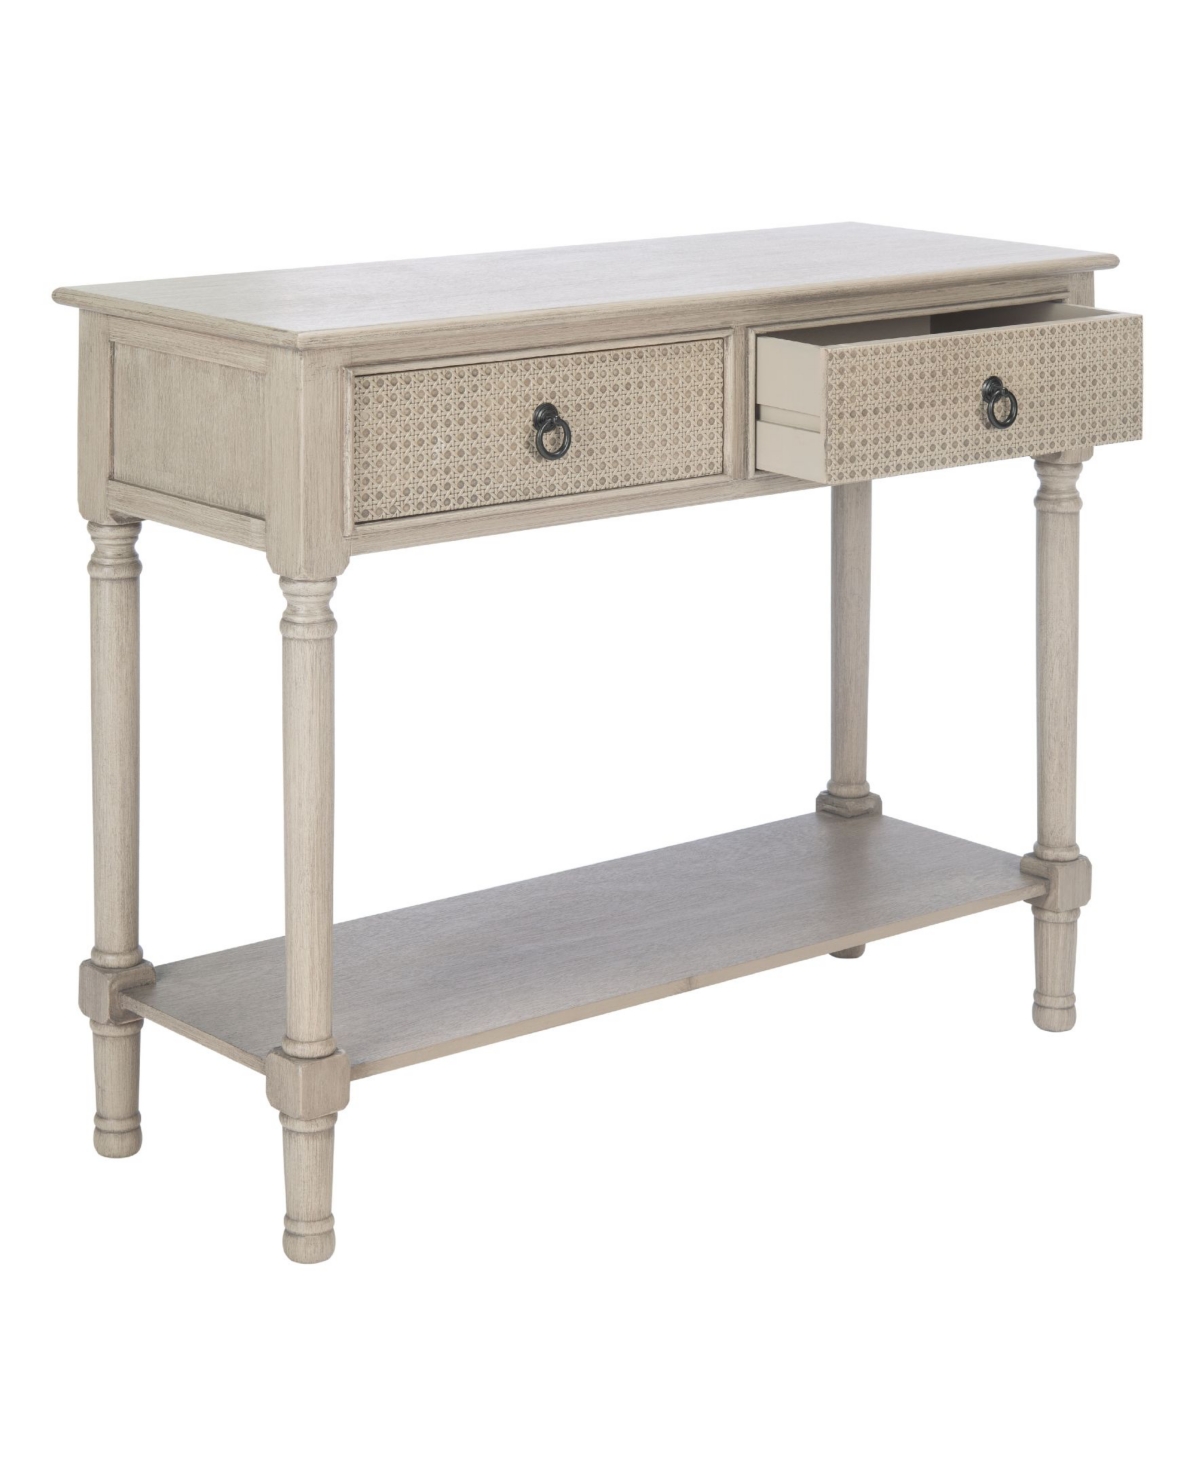 SAFAVIEH HAINES 2 DRAWER CONSOLE TABLE